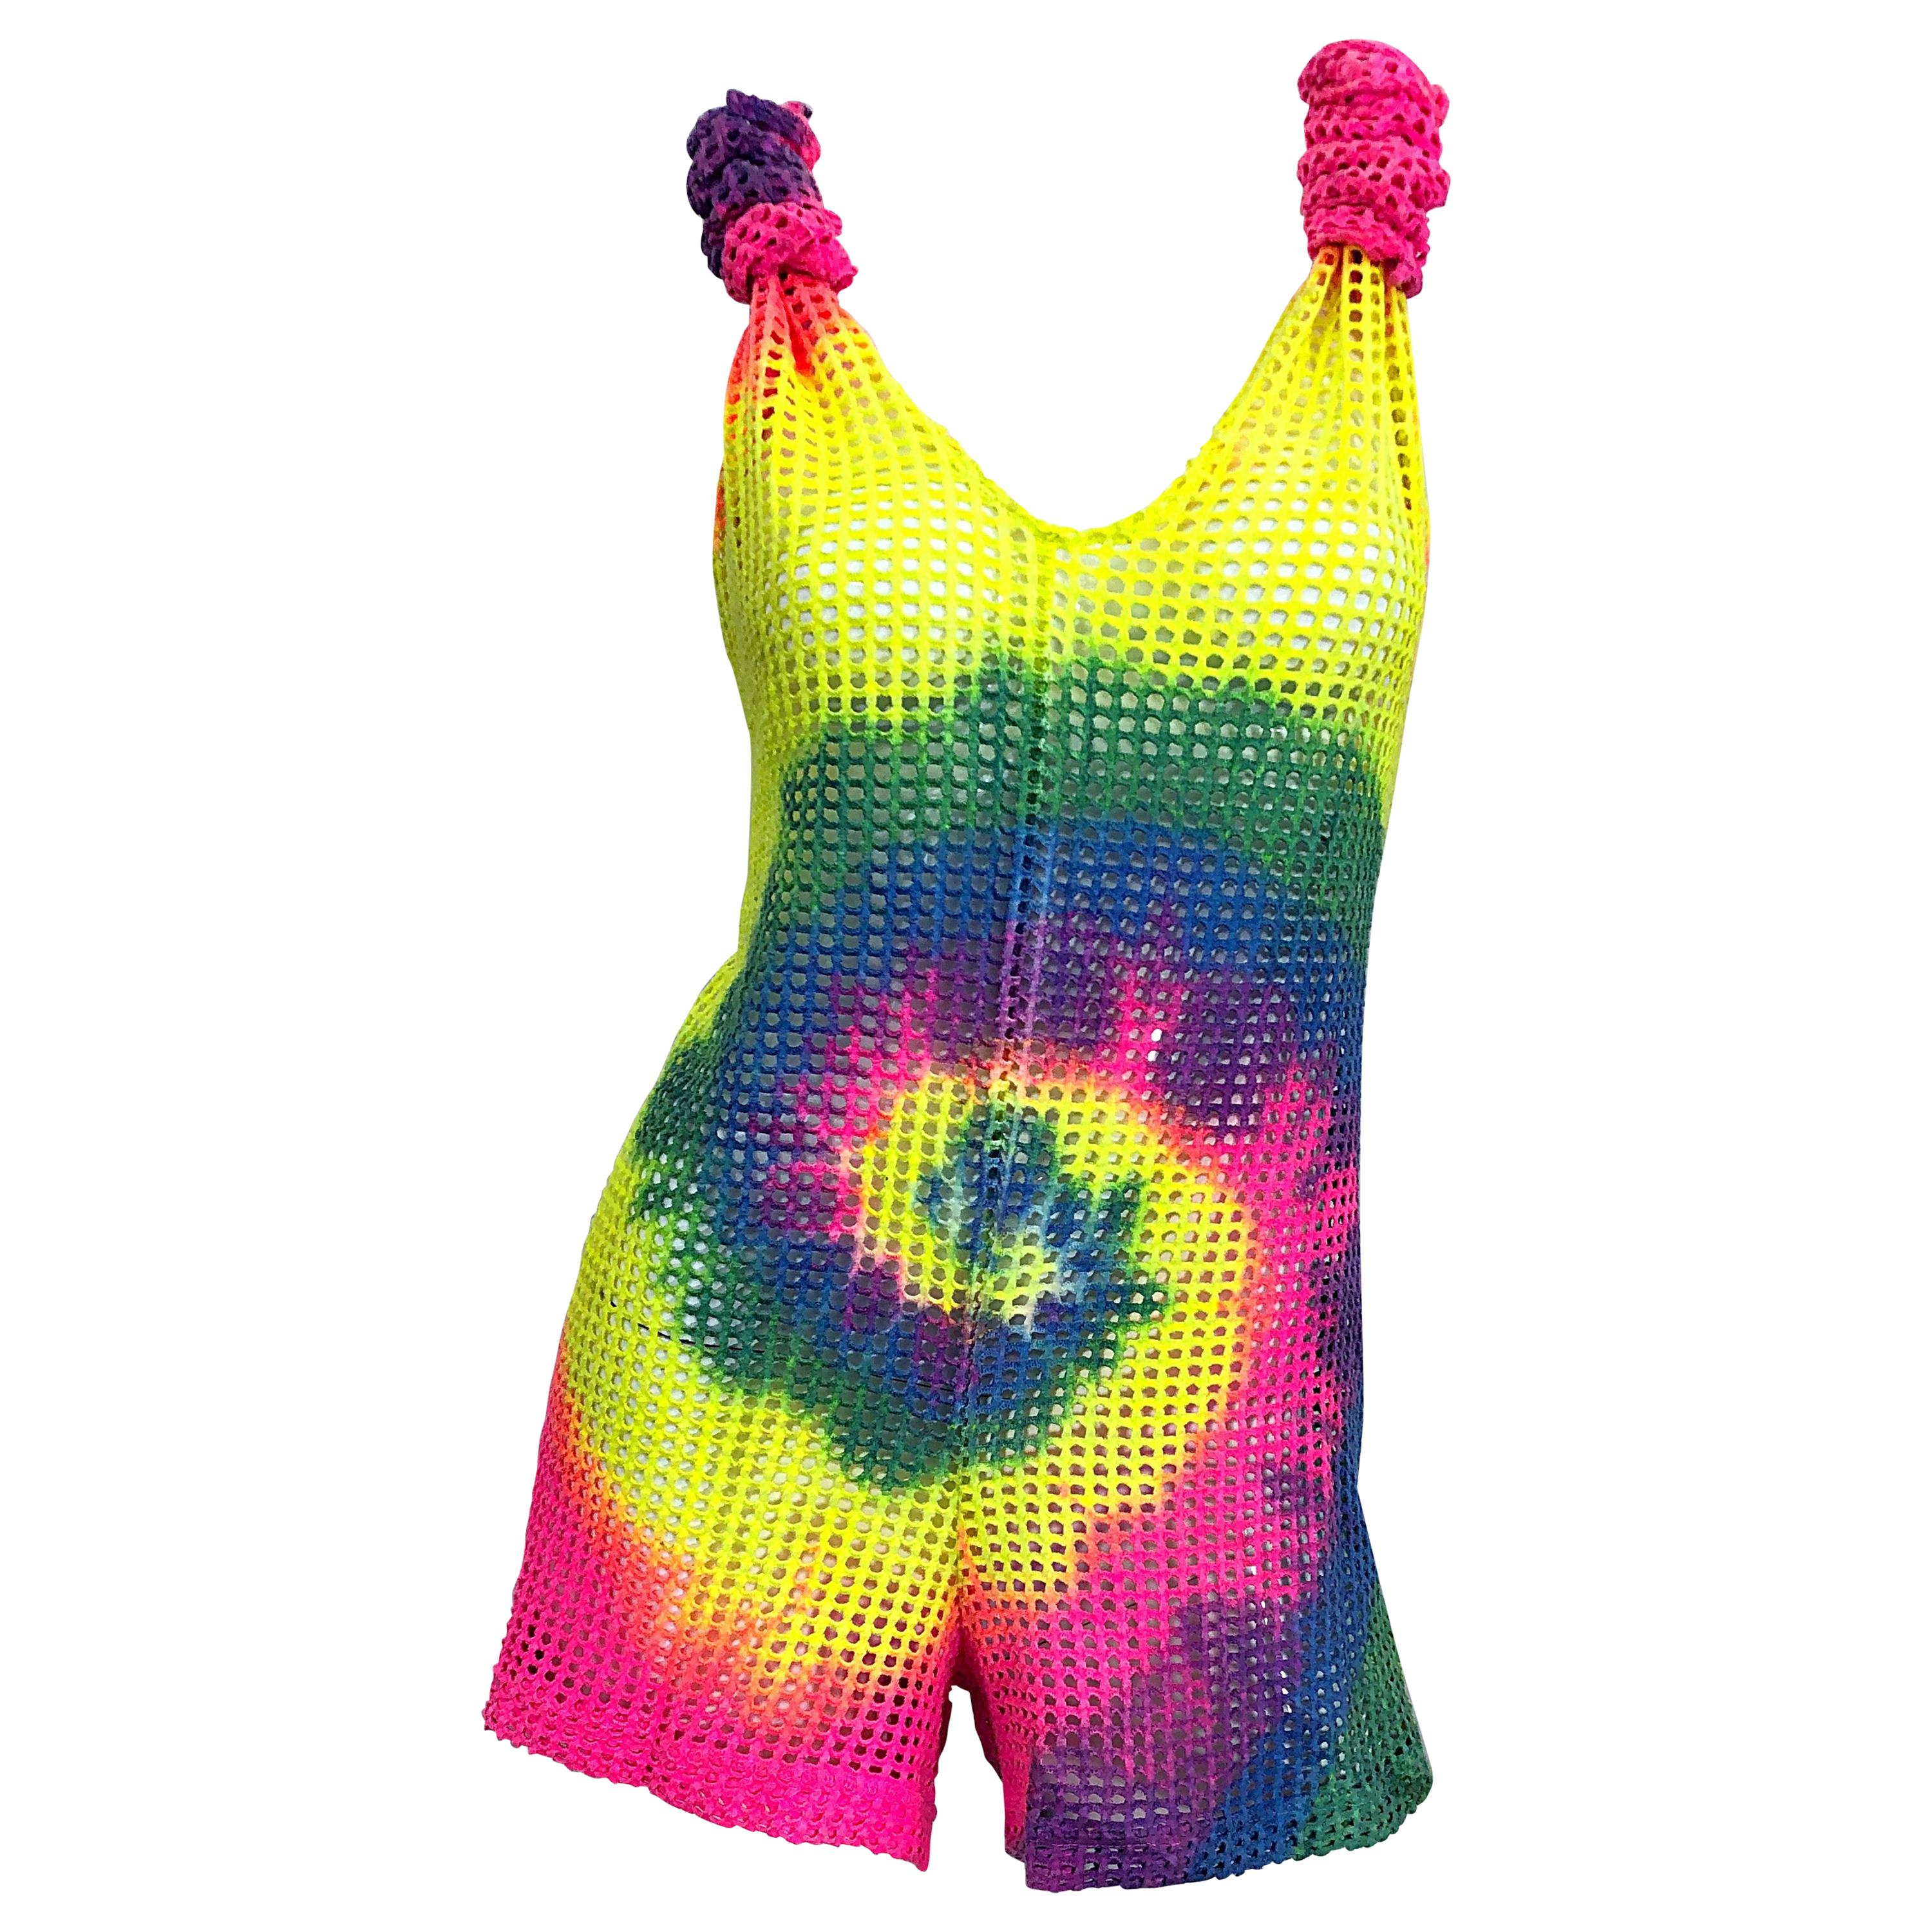 Amazing 1980s Tie Dyed Bright Colorful One Piece Fishnet Cut Out Vintage Romper